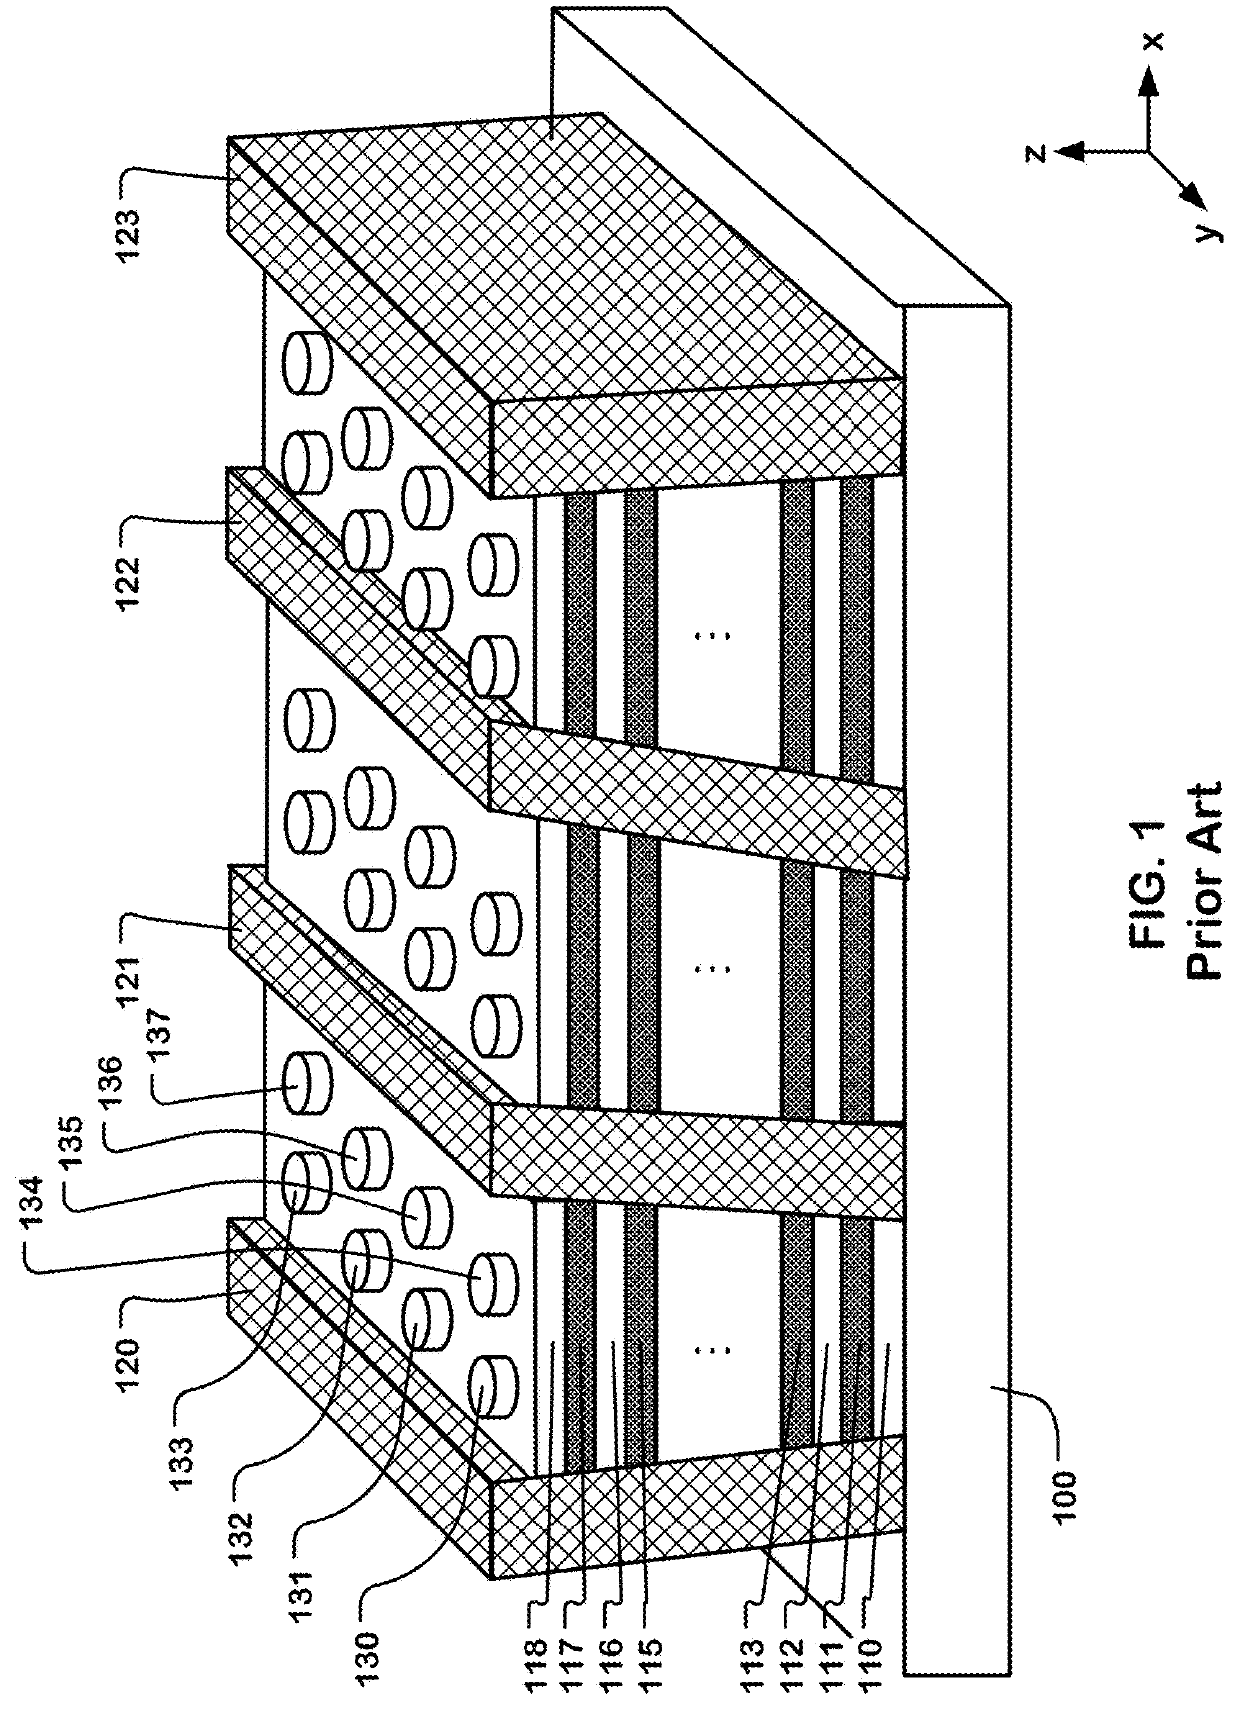 3D memory device with layered conductors